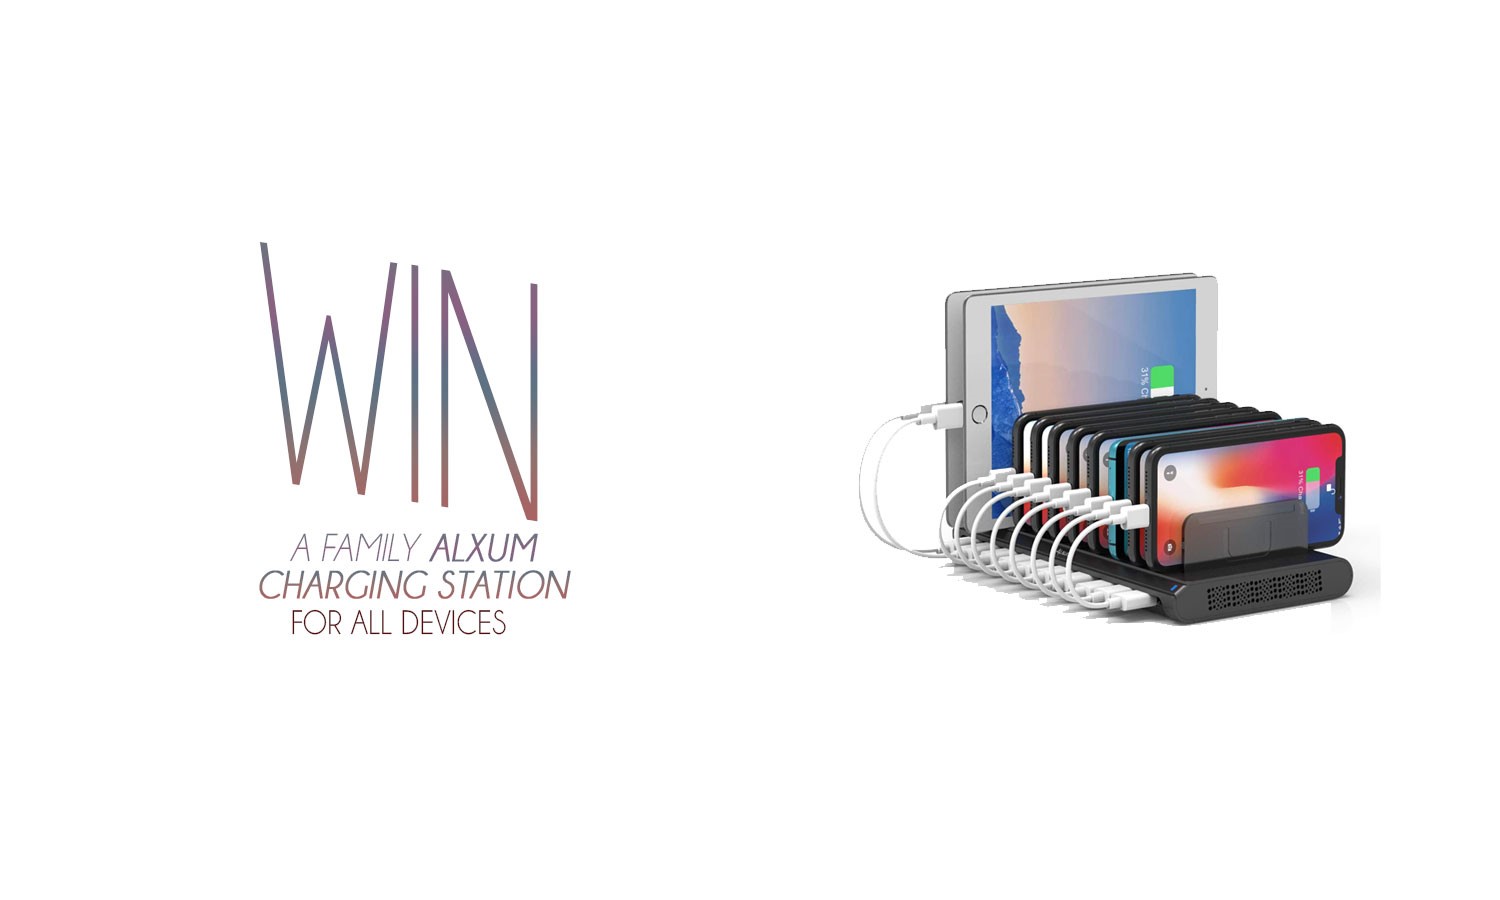 Win Alxum charging station for all devices